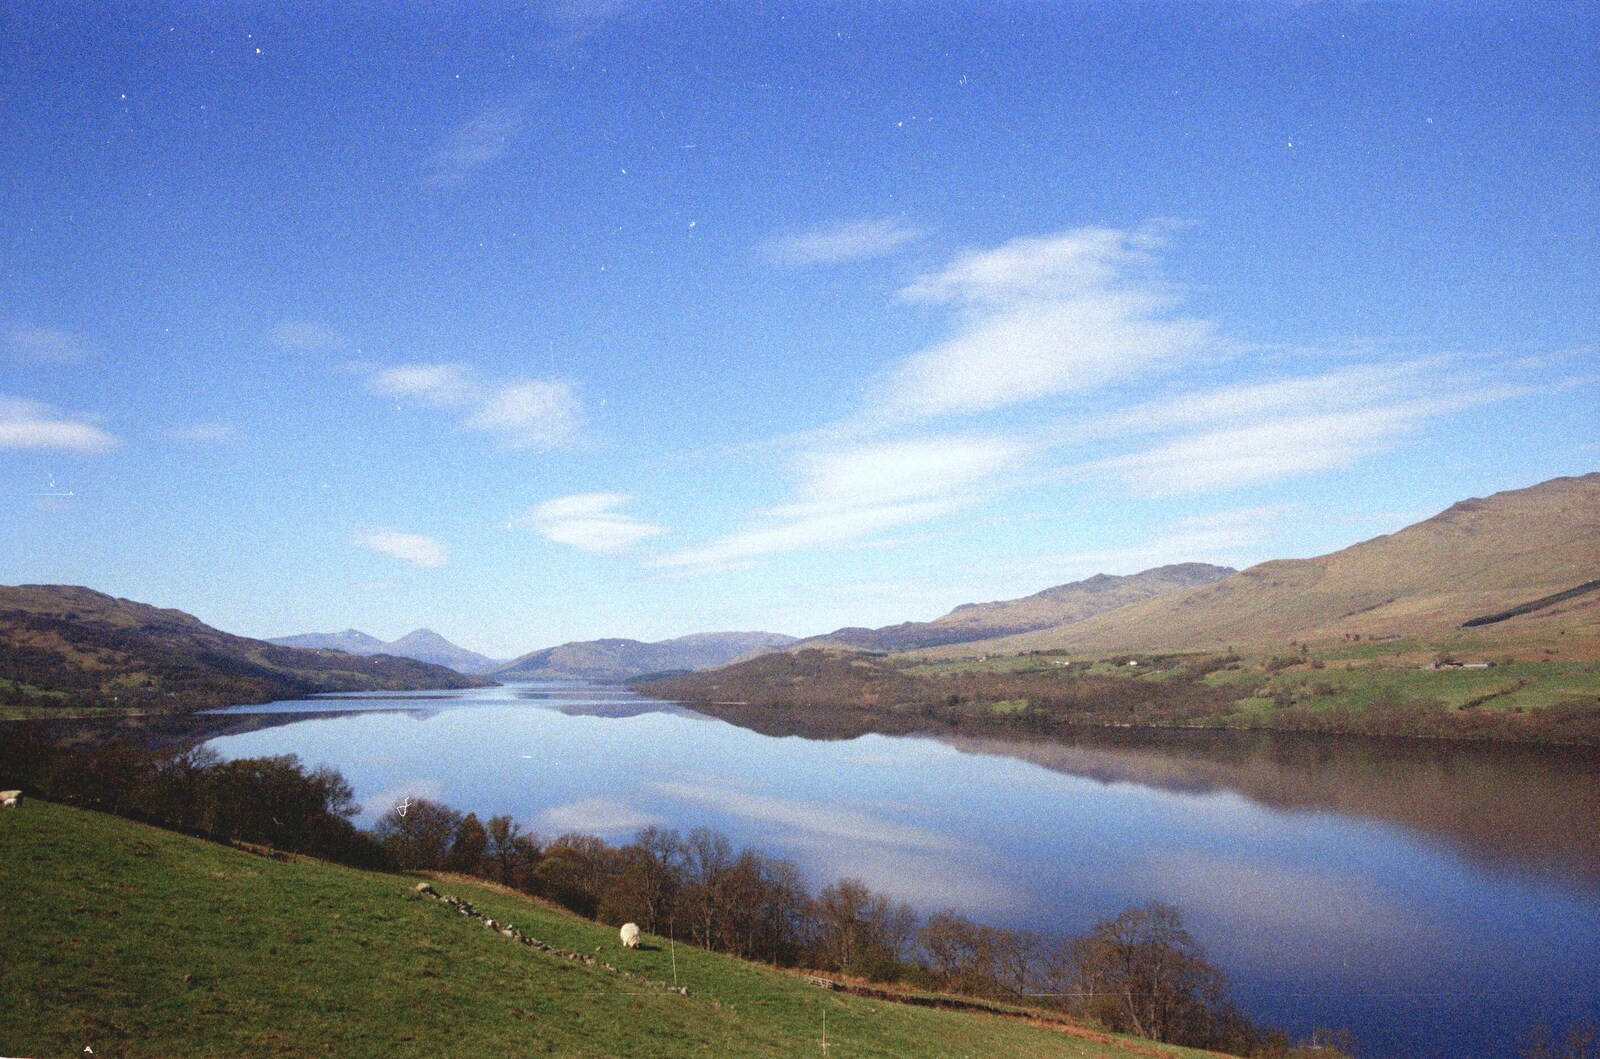 Another loch scene from A Trip to Pitlochry, Scotland - 24th March 1998